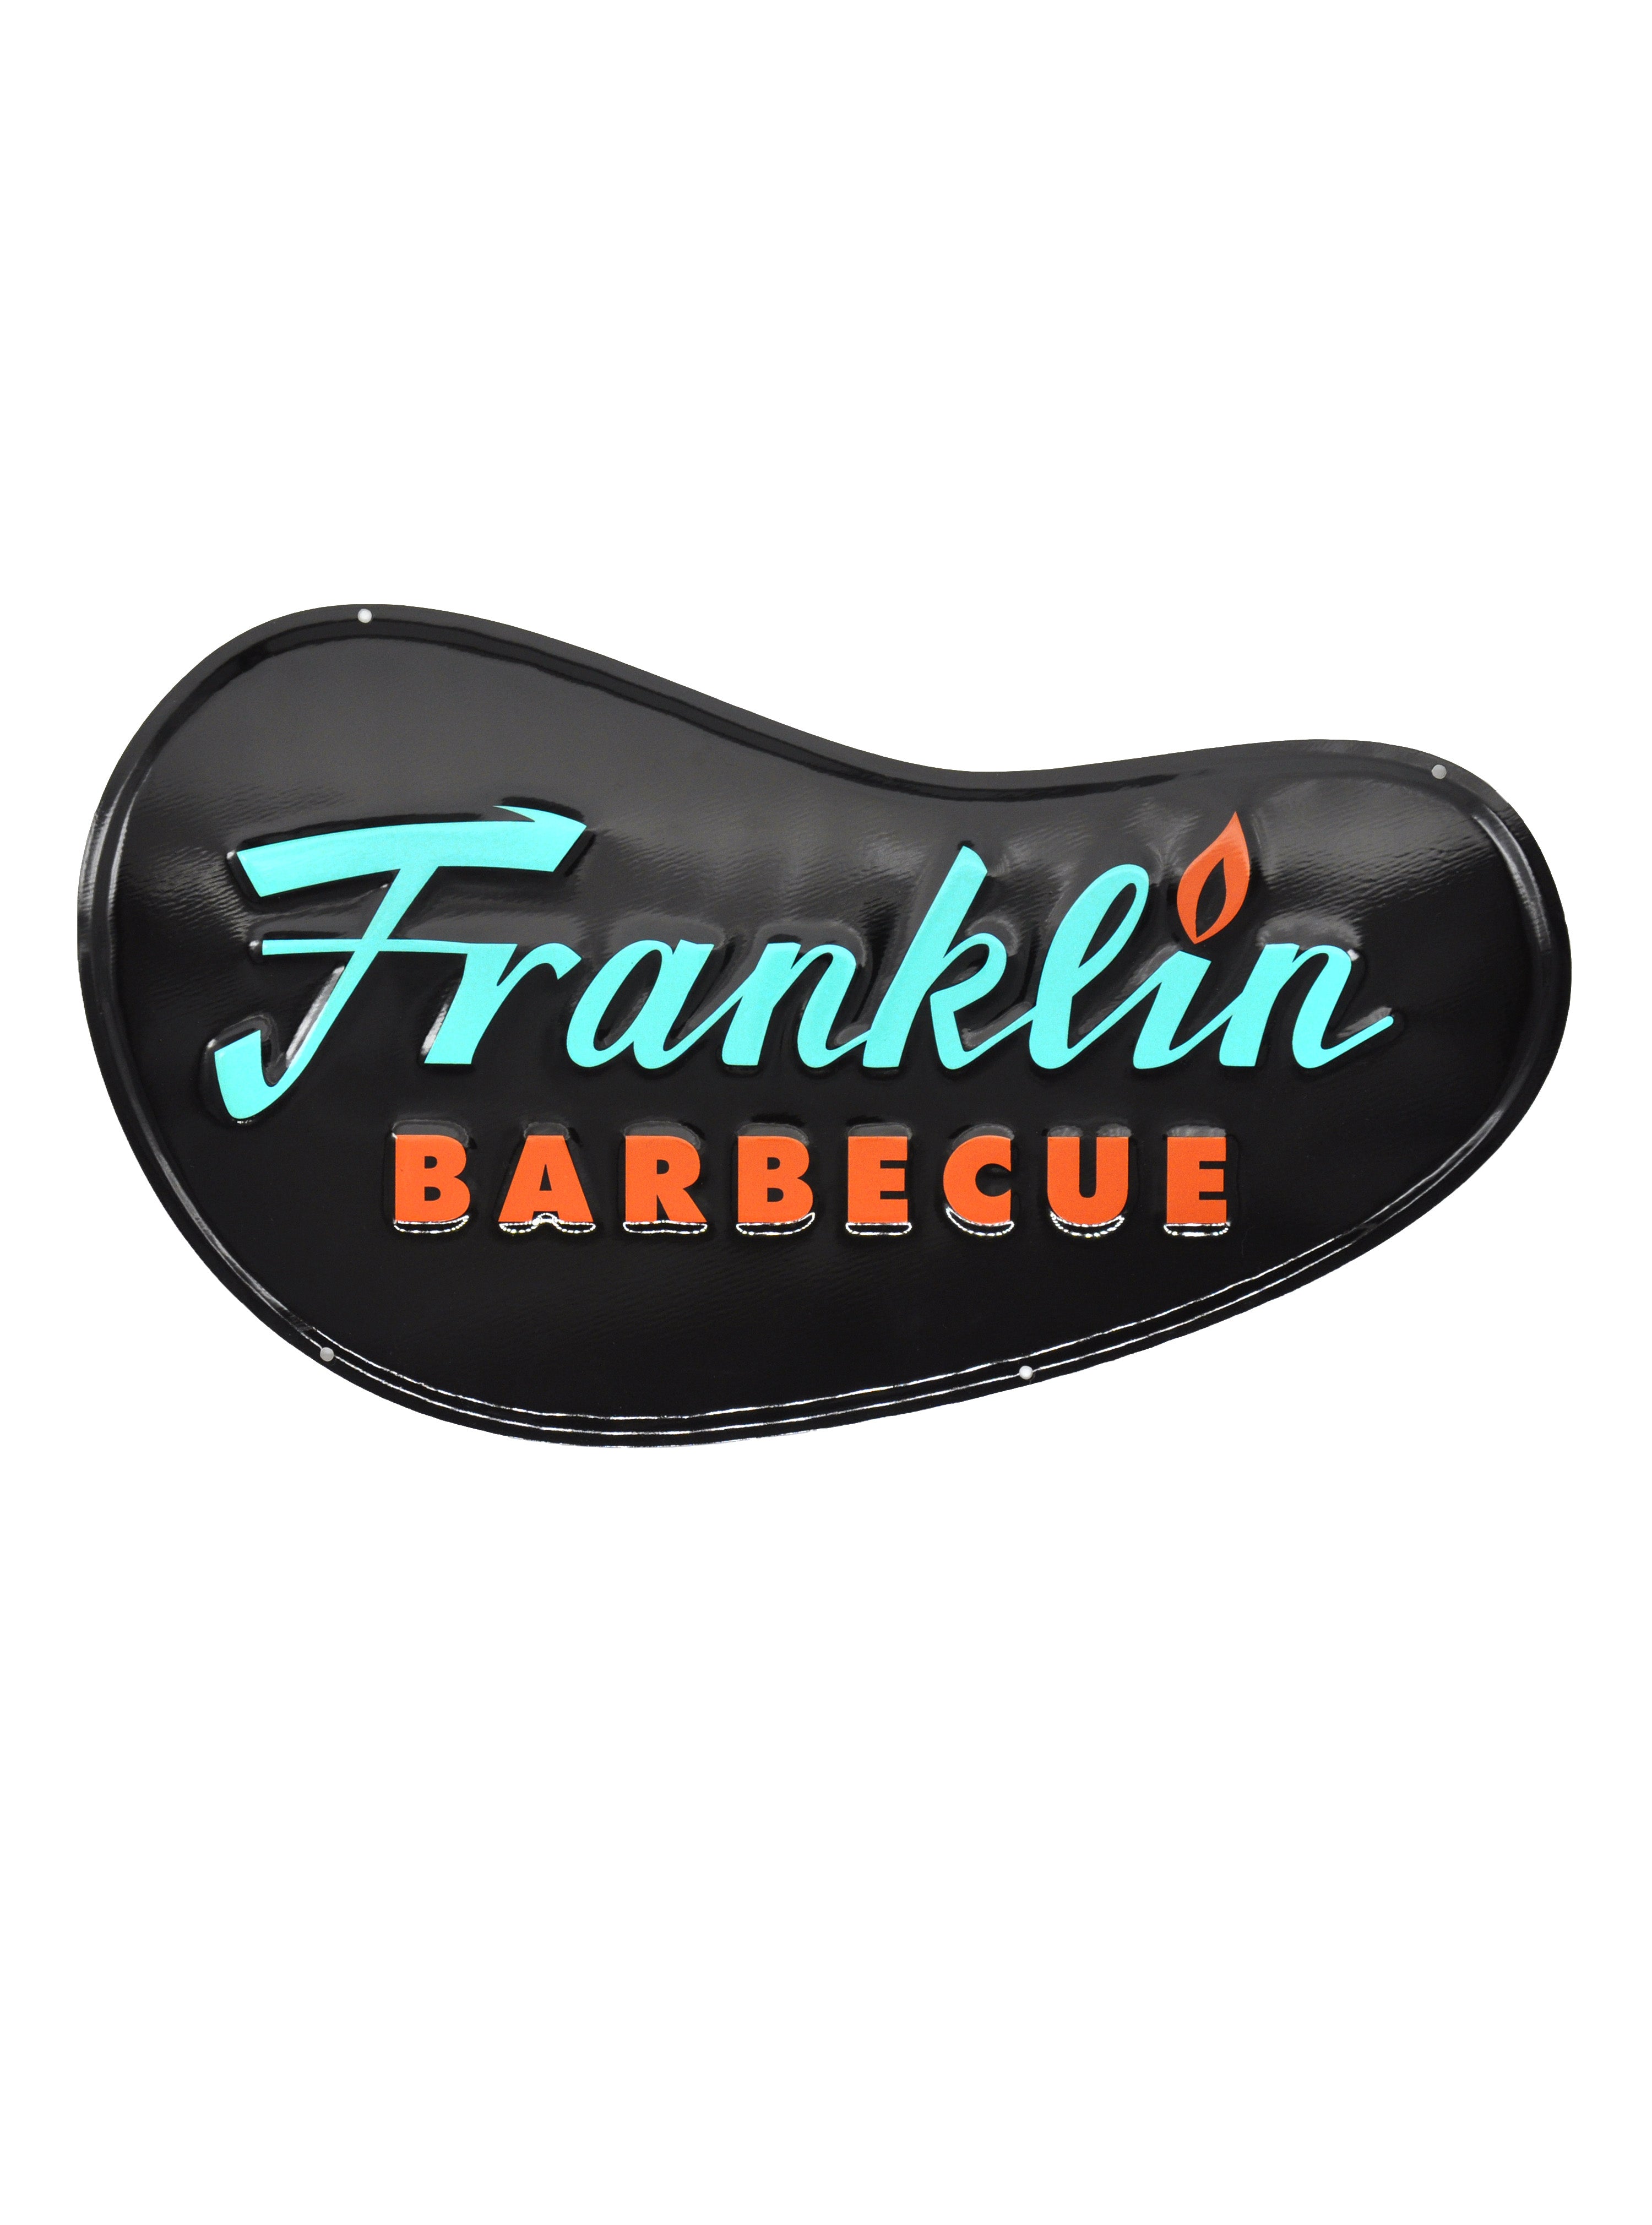 Aluminum tacker sign in the shape of the Franklin Barbecue restaurant sign. The Franklin Barbecue logo is printed and the lettering is embossed.